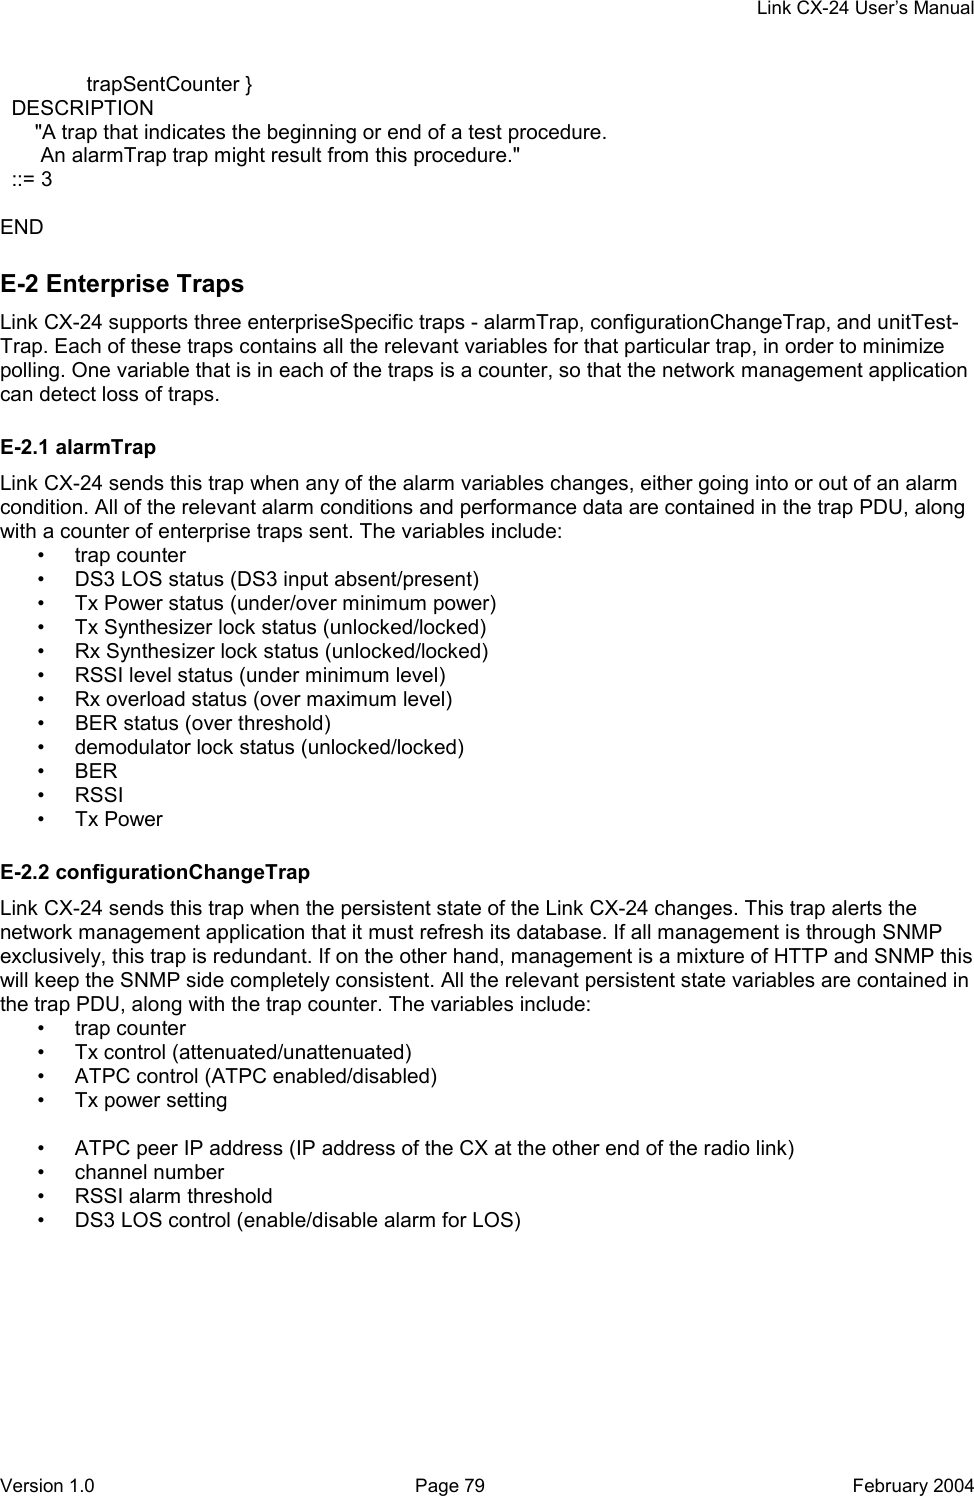     Link CX-24 User’s Manual Version 1.0  Page 79  February 2004                trapSentCounter }   DESCRIPTION       &quot;A trap that indicates the beginning or end of a test procedure.        An alarmTrap trap might result from this procedure.&quot;   ::= 3  END E-2 Enterprise Traps Link CX-24 supports three enterpriseSpecific traps - alarmTrap, configurationChangeTrap, and unitTest- Trap. Each of these traps contains all the relevant variables for that particular trap, in order to minimize polling. One variable that is in each of the traps is a counter, so that the network management application can detect loss of traps. E-2.1 alarmTrap Link CX-24 sends this trap when any of the alarm variables changes, either going into or out of an alarm condition. All of the relevant alarm conditions and performance data are contained in the trap PDU, along with a counter of enterprise traps sent. The variables include: • trap counter •  DS3 LOS status (DS3 input absent/present) •  Tx Power status (under/over minimum power) •  Tx Synthesizer lock status (unlocked/locked) •  Rx Synthesizer lock status (unlocked/locked) •  RSSI level status (under minimum level) •  Rx overload status (over maximum level) •  BER status (over threshold) •  demodulator lock status (unlocked/locked) • BER • RSSI • Tx Power E-2.2 configurationChangeTrap Link CX-24 sends this trap when the persistent state of the Link CX-24 changes. This trap alerts the network management application that it must refresh its database. If all management is through SNMP exclusively, this trap is redundant. If on the other hand, management is a mixture of HTTP and SNMP this will keep the SNMP side completely consistent. All the relevant persistent state variables are contained in the trap PDU, along with the trap counter. The variables include: • trap counter • Tx control (attenuated/unattenuated) •  ATPC control (ATPC enabled/disabled) •  Tx power setting  •  ATPC peer IP address (IP address of the CX at the other end of the radio link) • channel number •  RSSI alarm threshold •  DS3 LOS control (enable/disable alarm for LOS) 